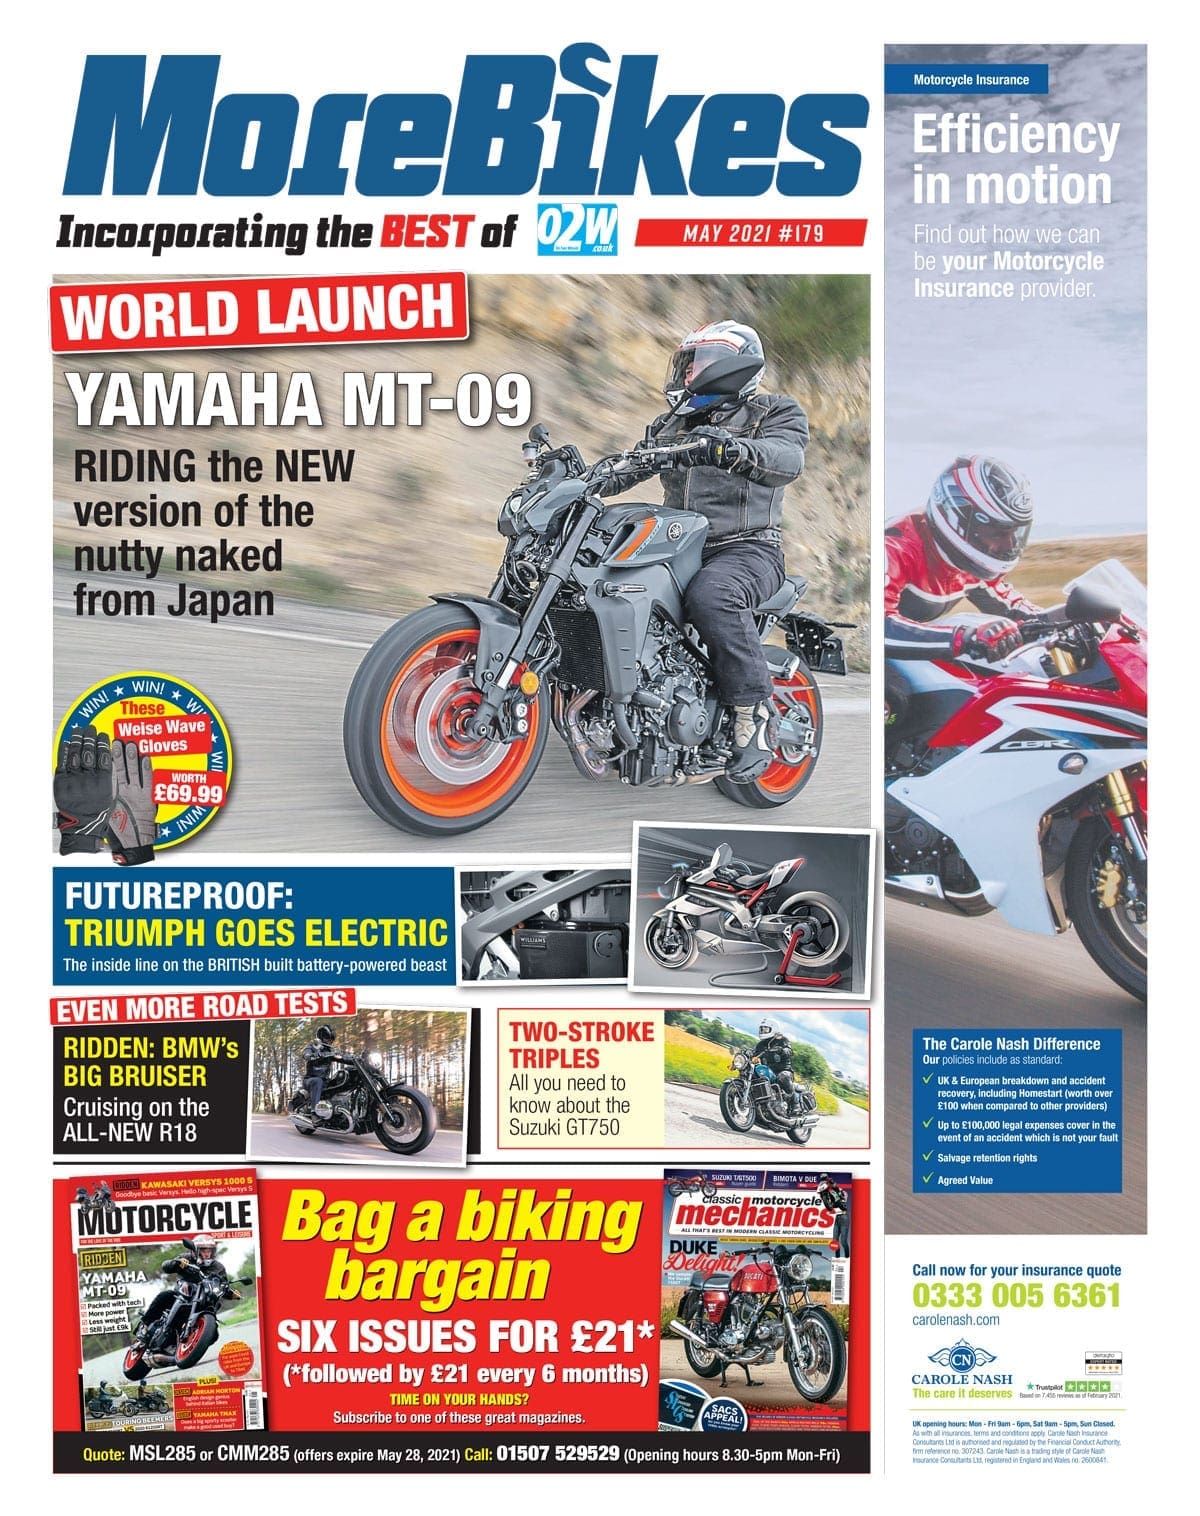 PREVIEW: Inside the May issue of MoreBikes